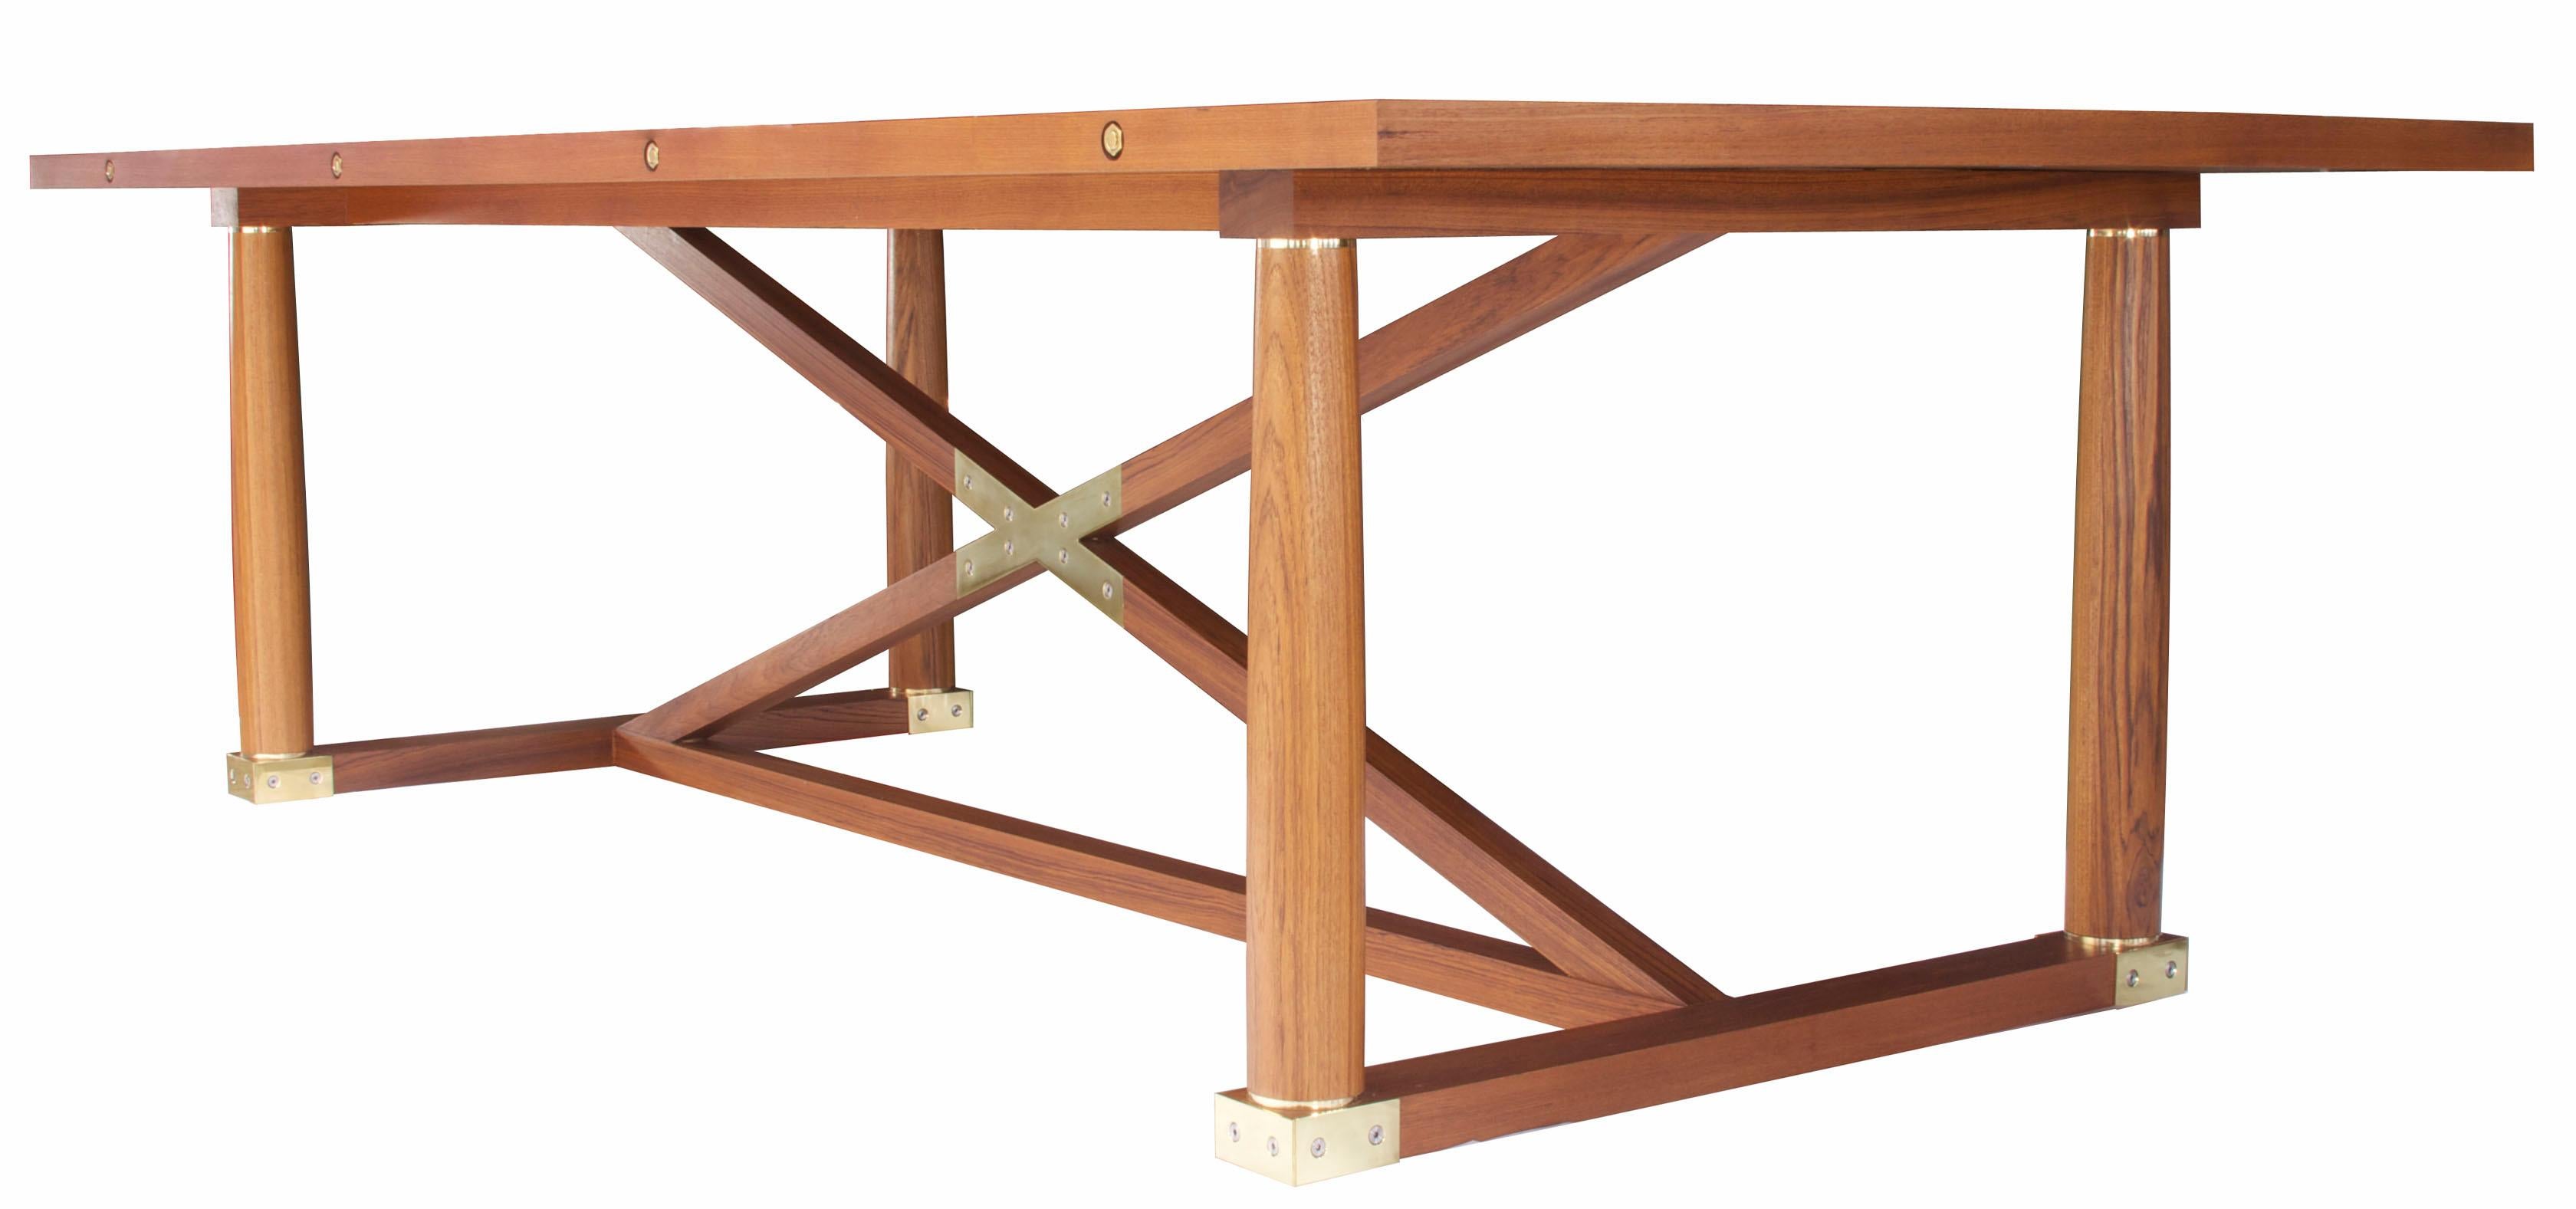 Modern Carden Dining Table in Oiled Teak - handcrafted by Richard Wrightman Design